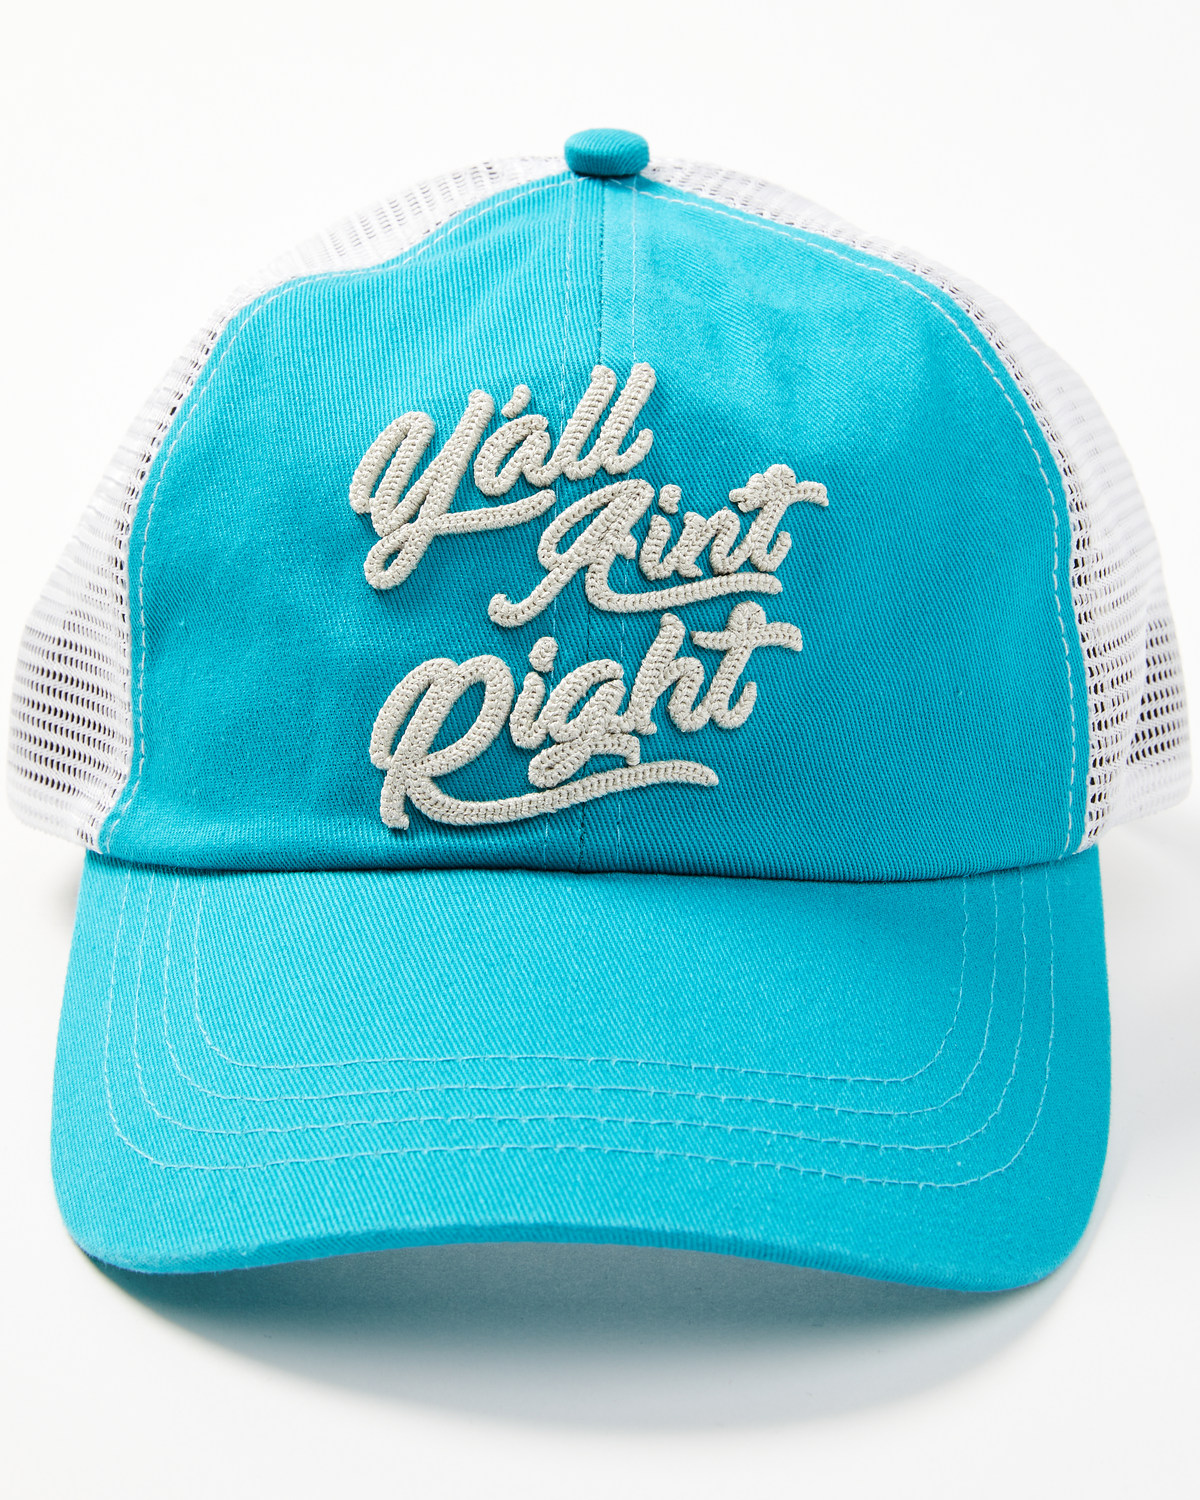 Idyllwind Women's Y'all Ain't Right Embroidered Mesh Back Ball Cap